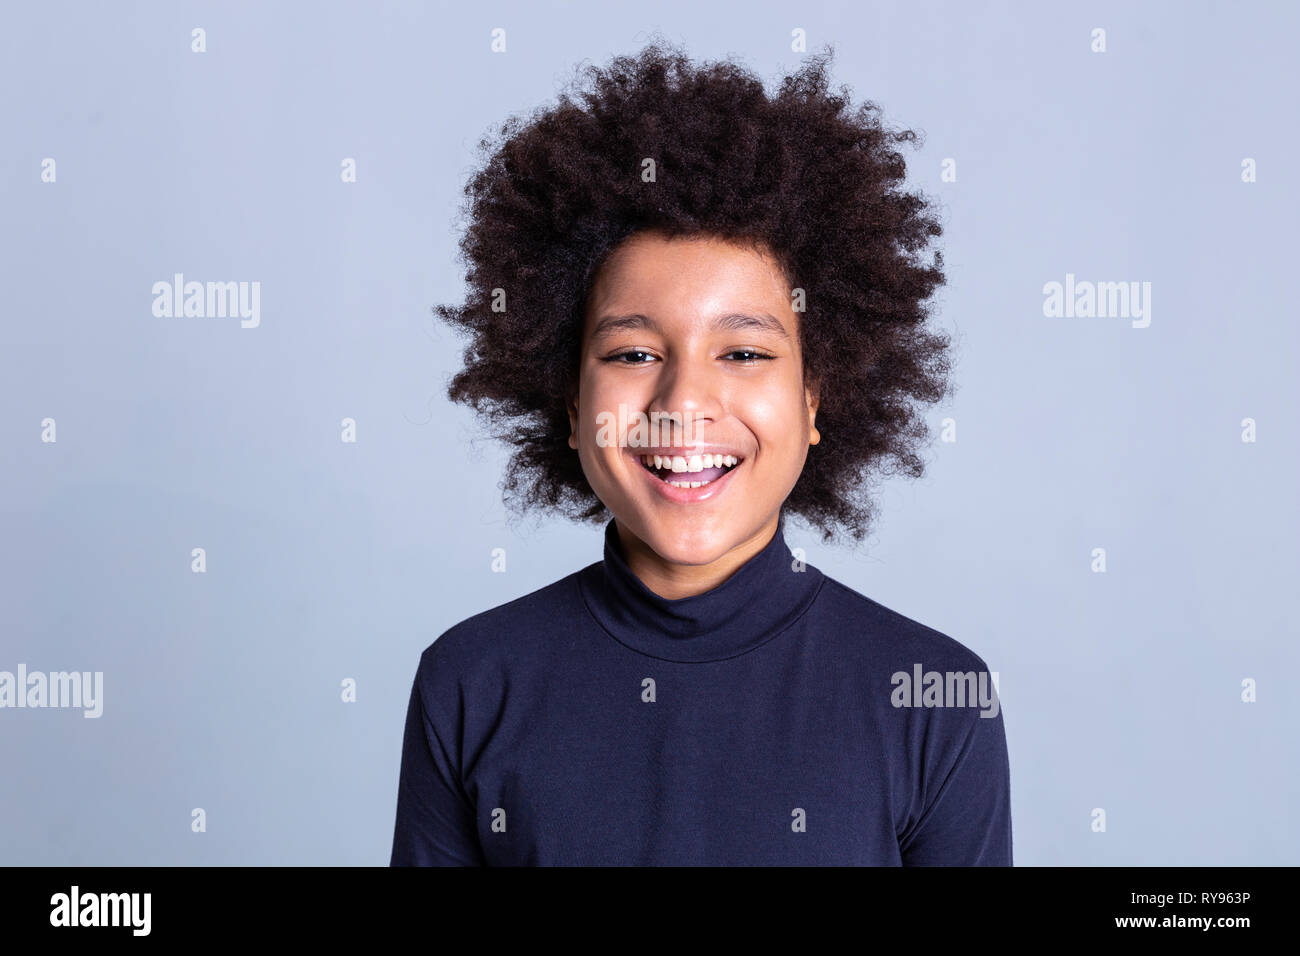 Dark-haired African American little person being extremely happy during photoshoot Stock Photo